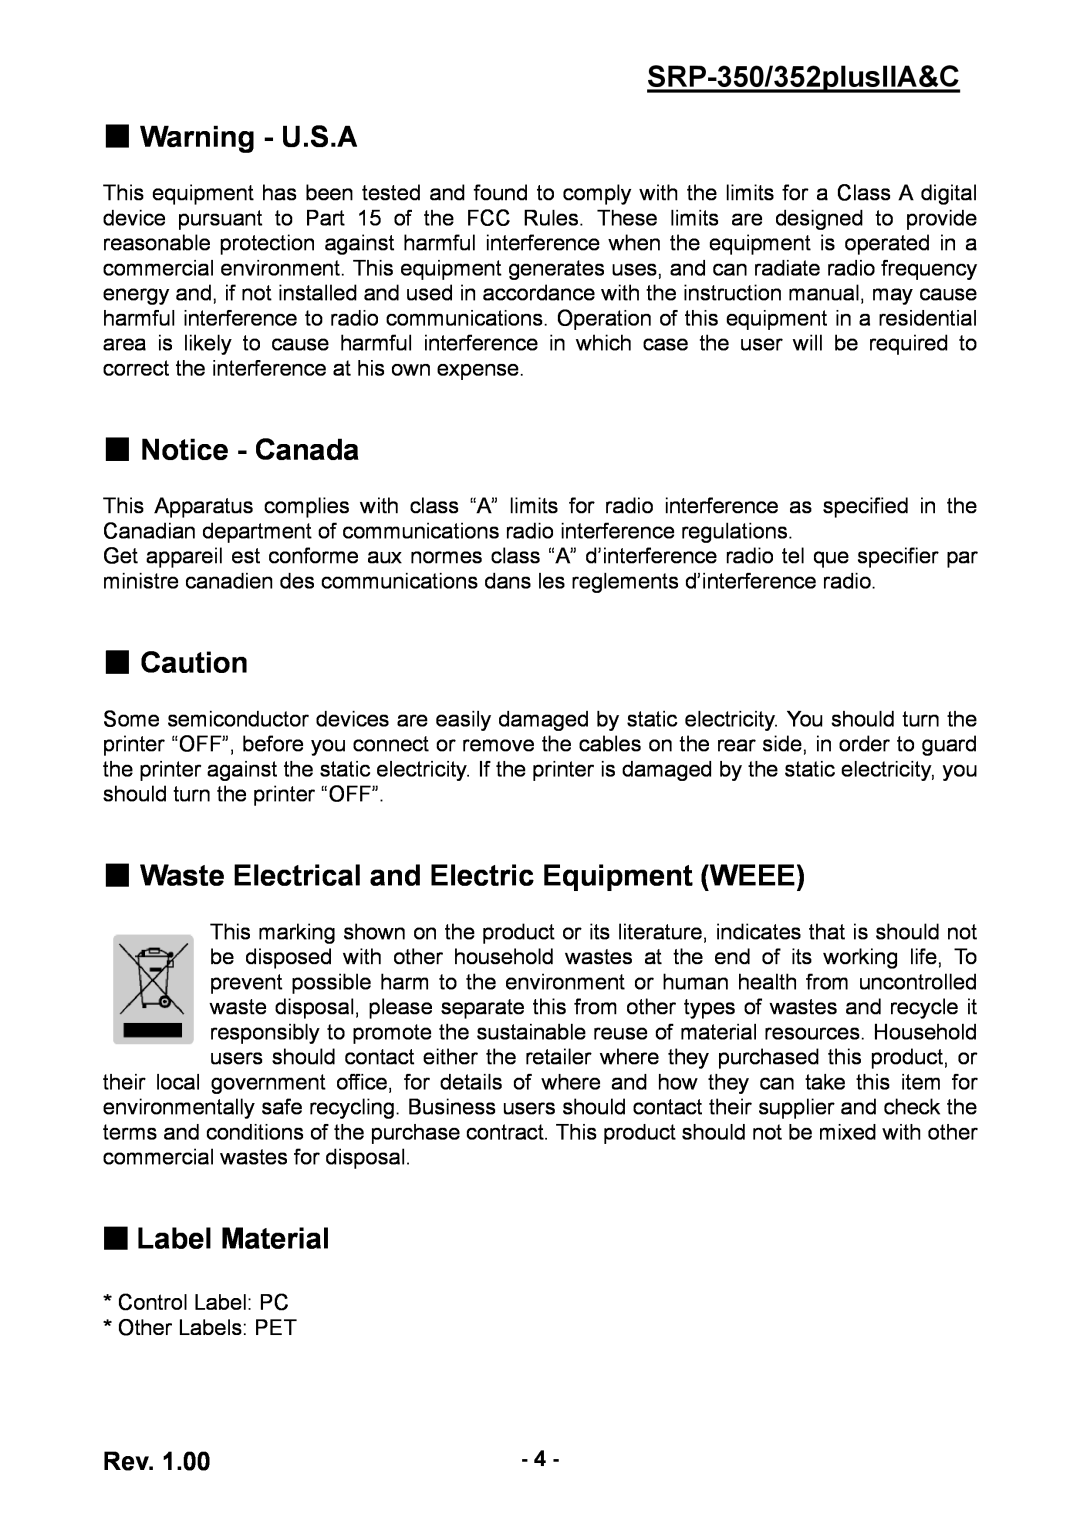 BIXOLON SRP-352 SRP-350/352plusIIA&C Warning - U.S.A, Notice - Canada, Waste Electrical and Electric Equipment WEEE 